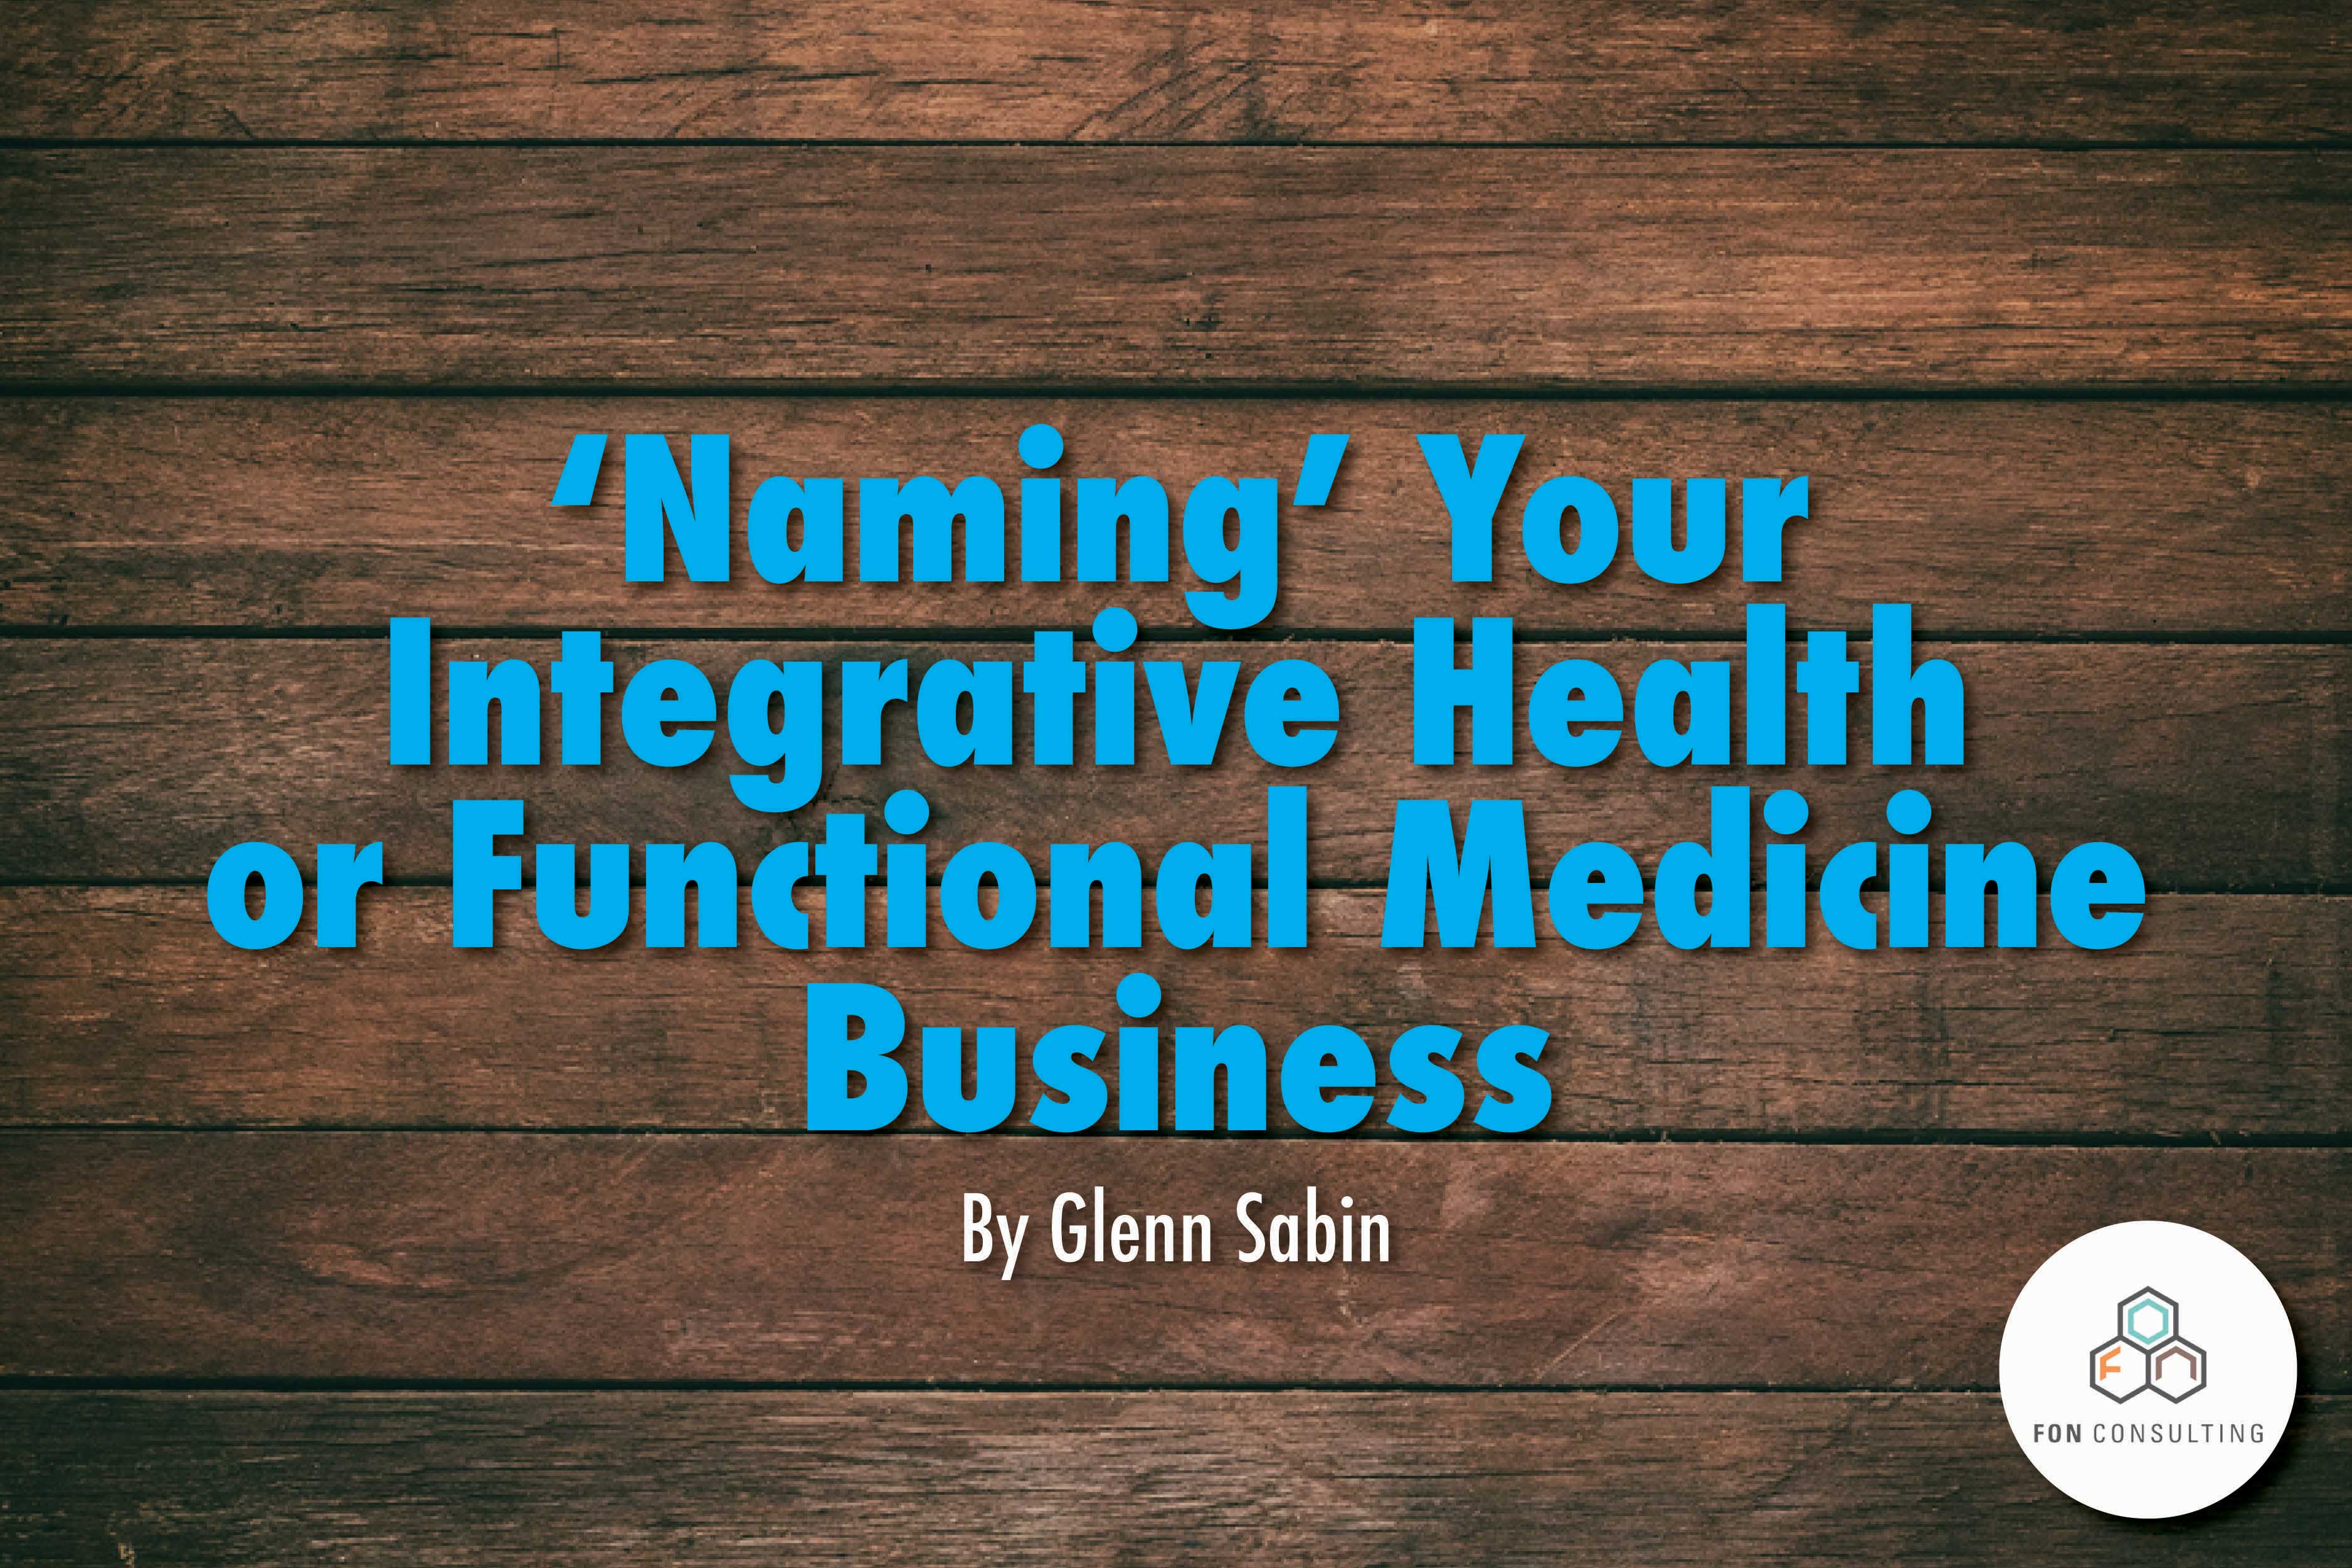 Textured background with text - 'Naming' Your Integrative or Functional Medicine Business